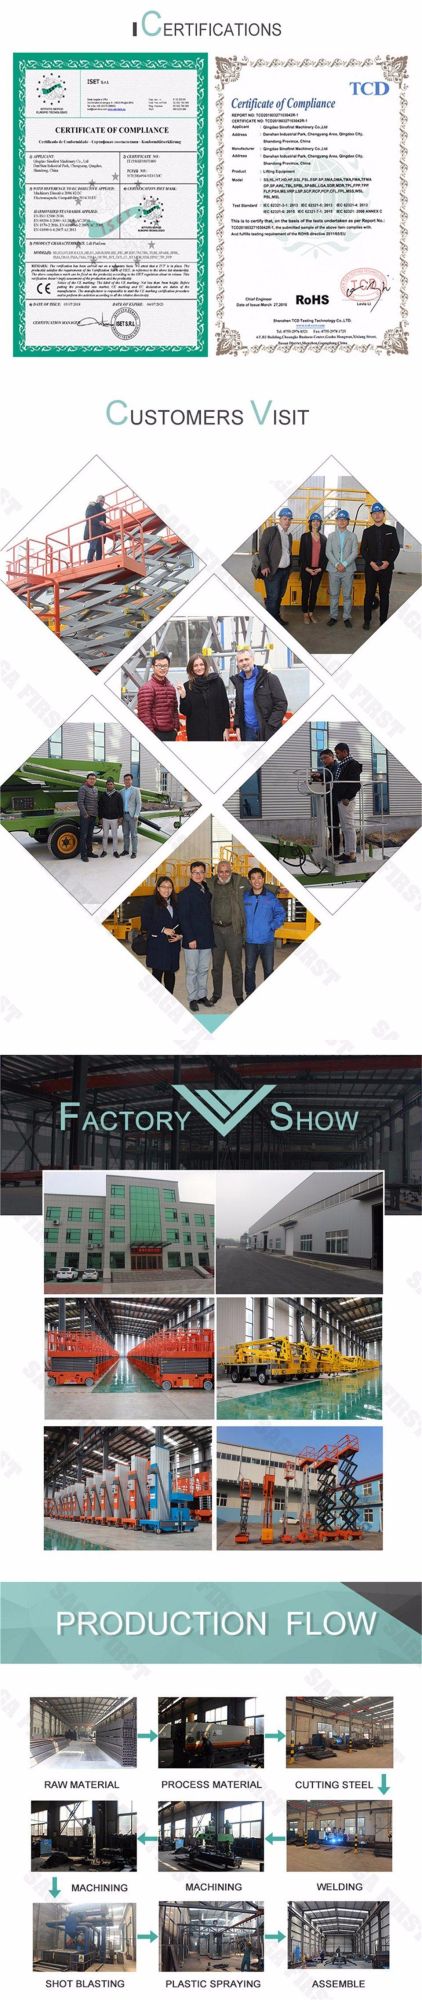 Electric Vertical Warehouse Material Platform Lifts for Sale